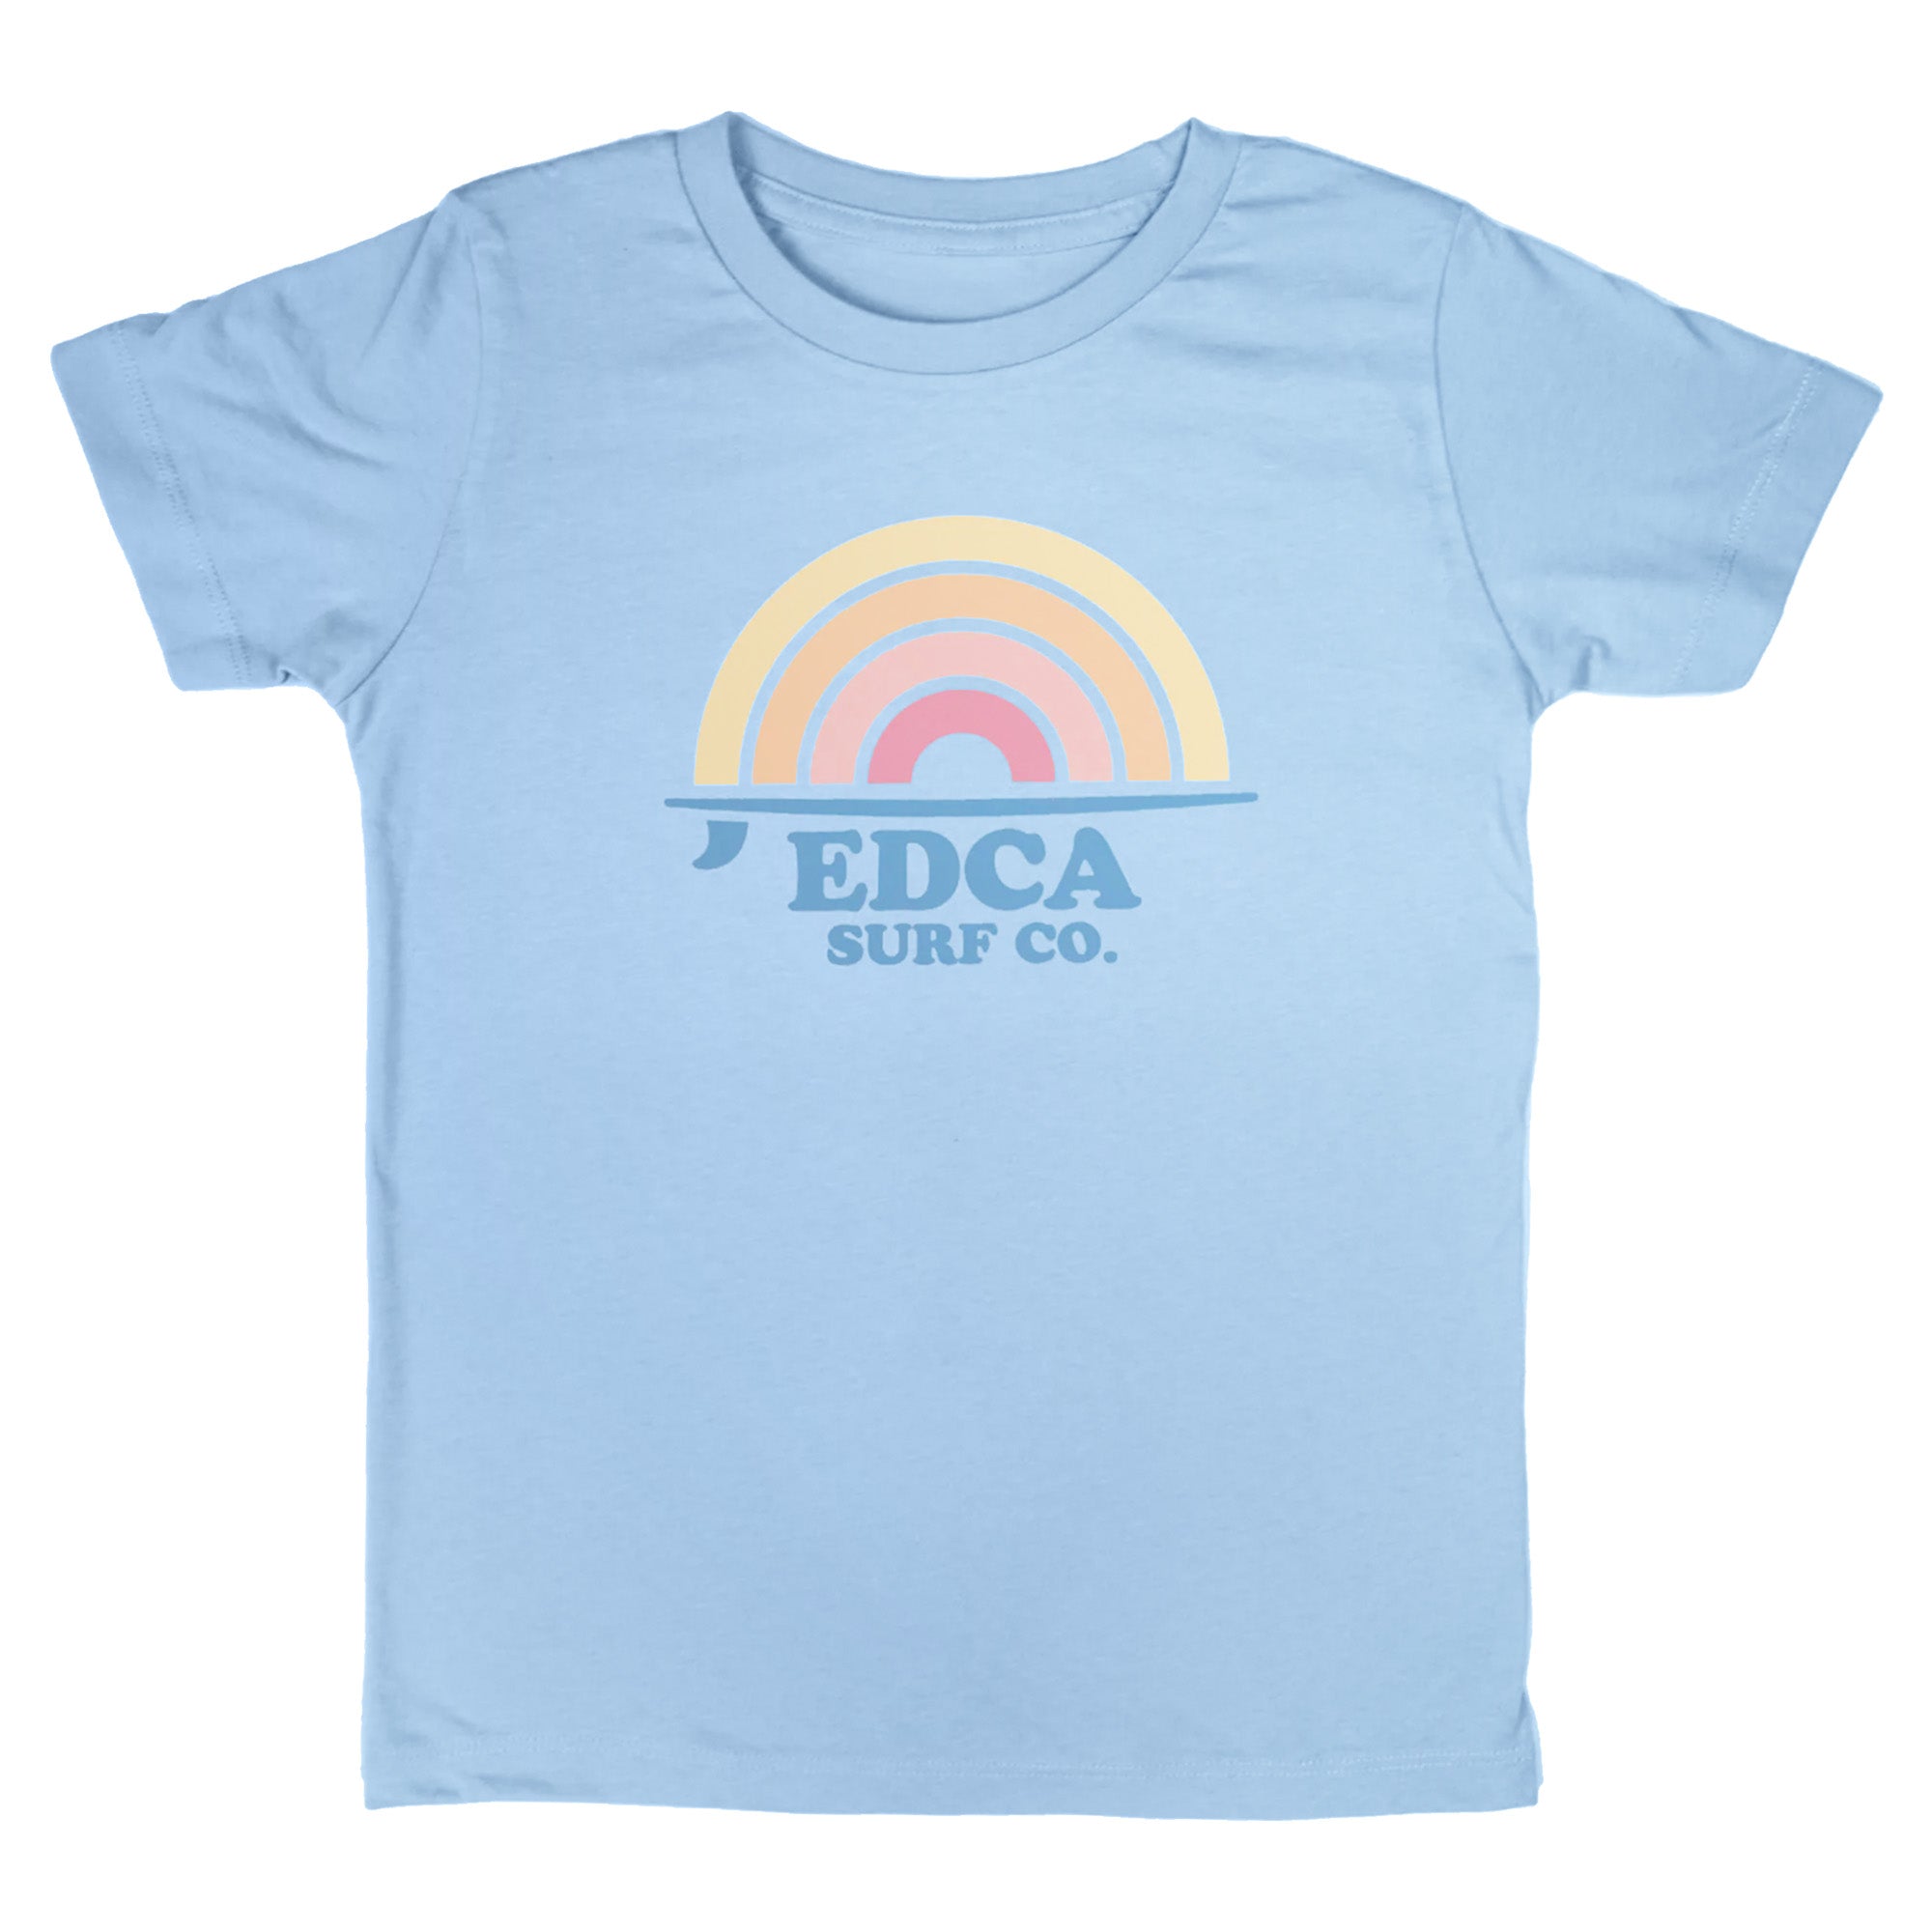 Cambria Tee - Rainbow with surfboard design on a baby blue tee